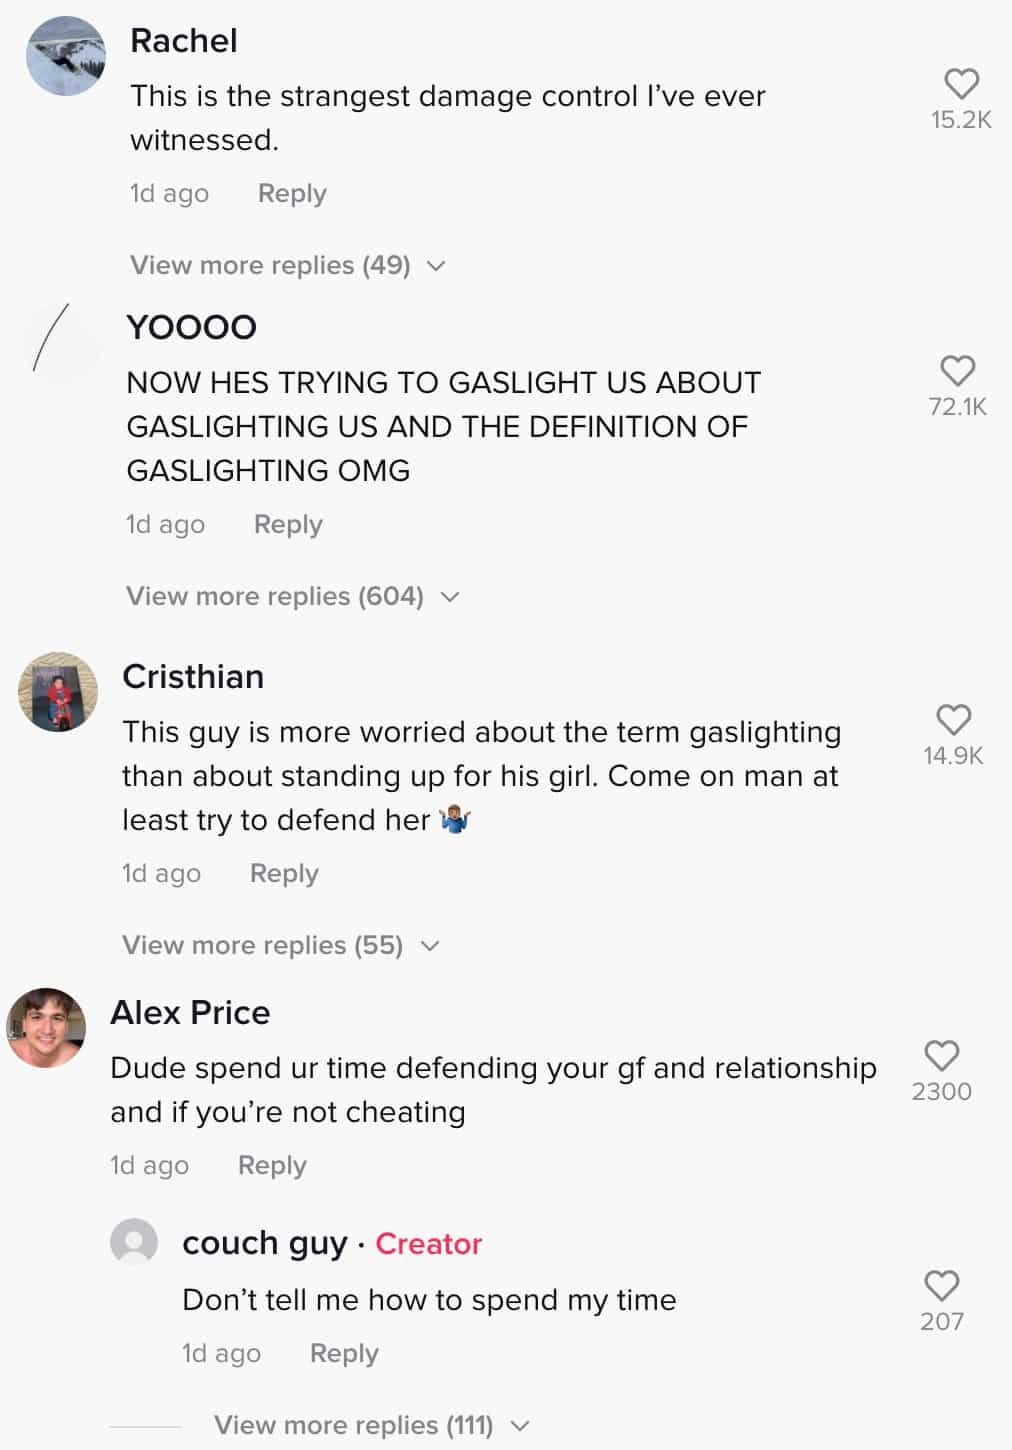 Viewers comment on a TikTok made by Couch Guy